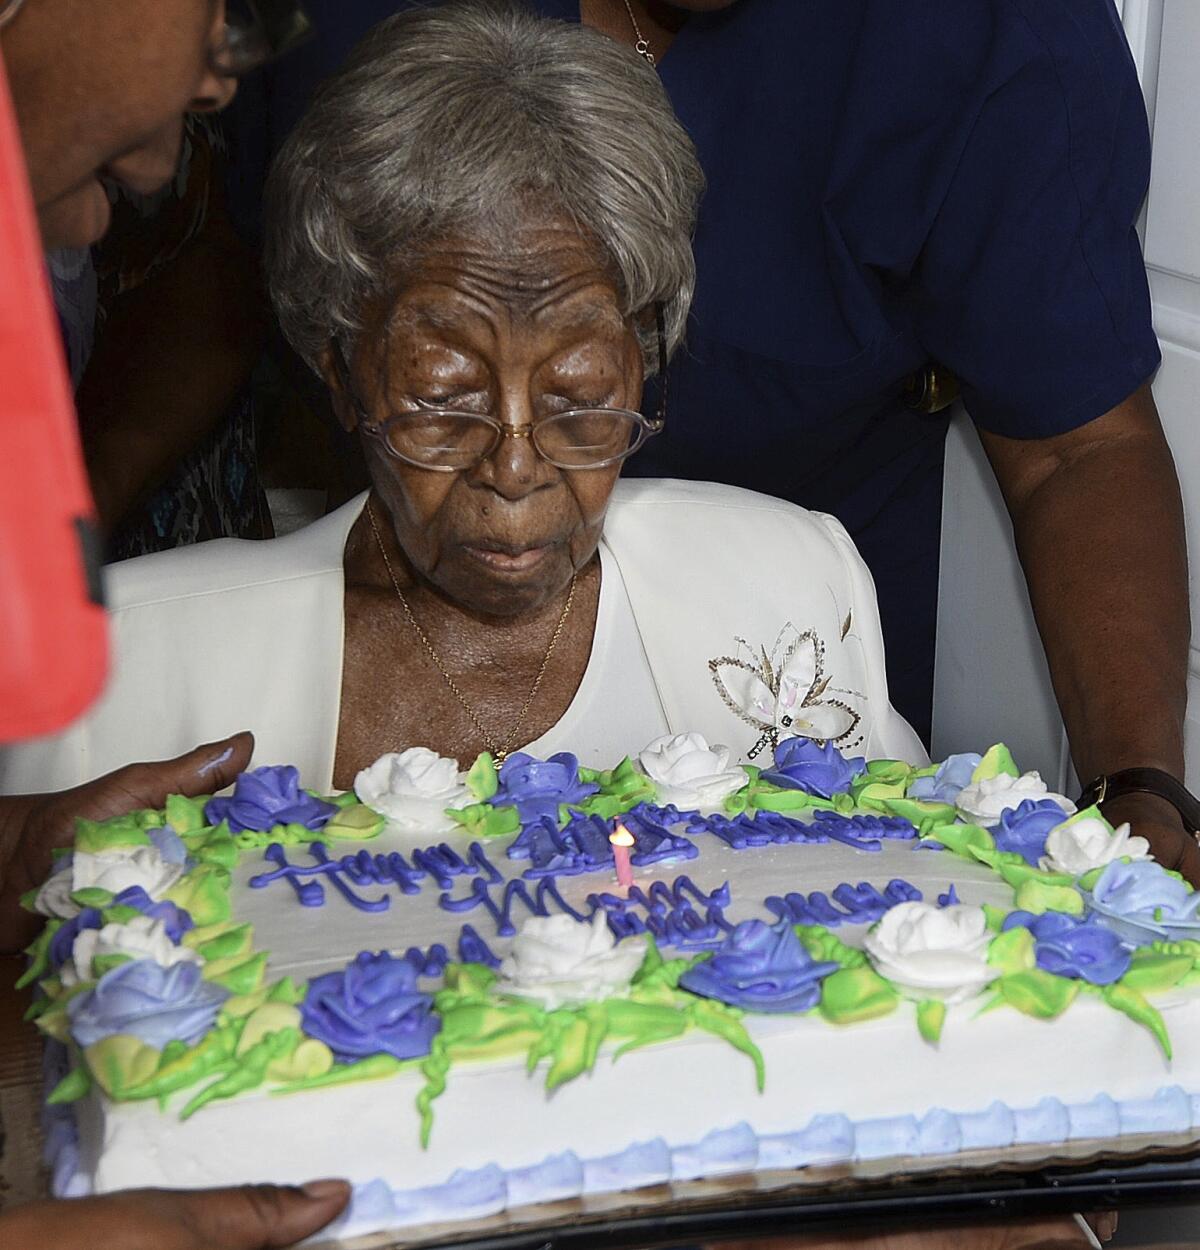 Hester "Granny" Ford at 111th birthday party blows out a candle on a cake decorated with flowers made of icing